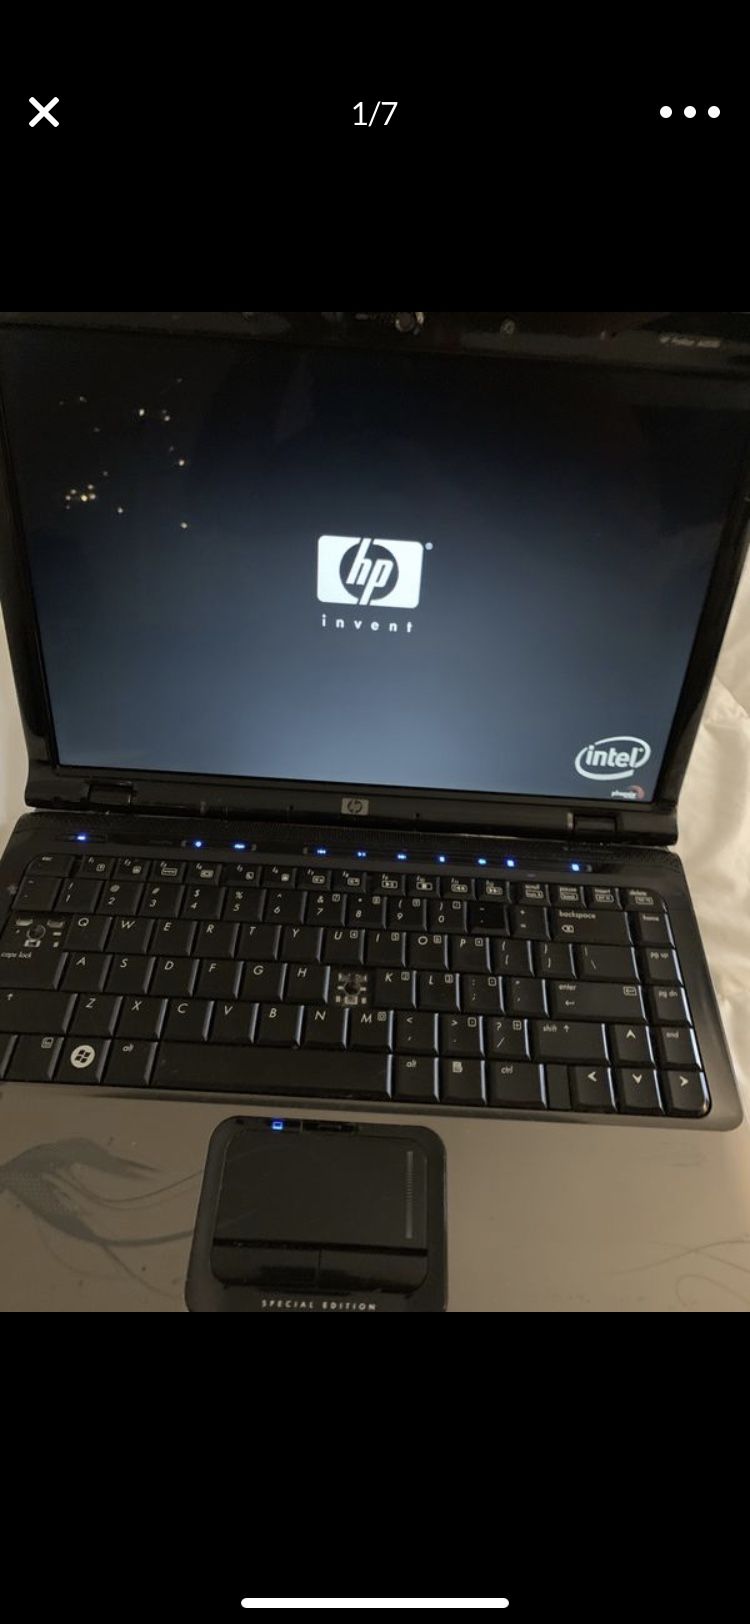 HP pavilion special edition DV2500 best offer or trade